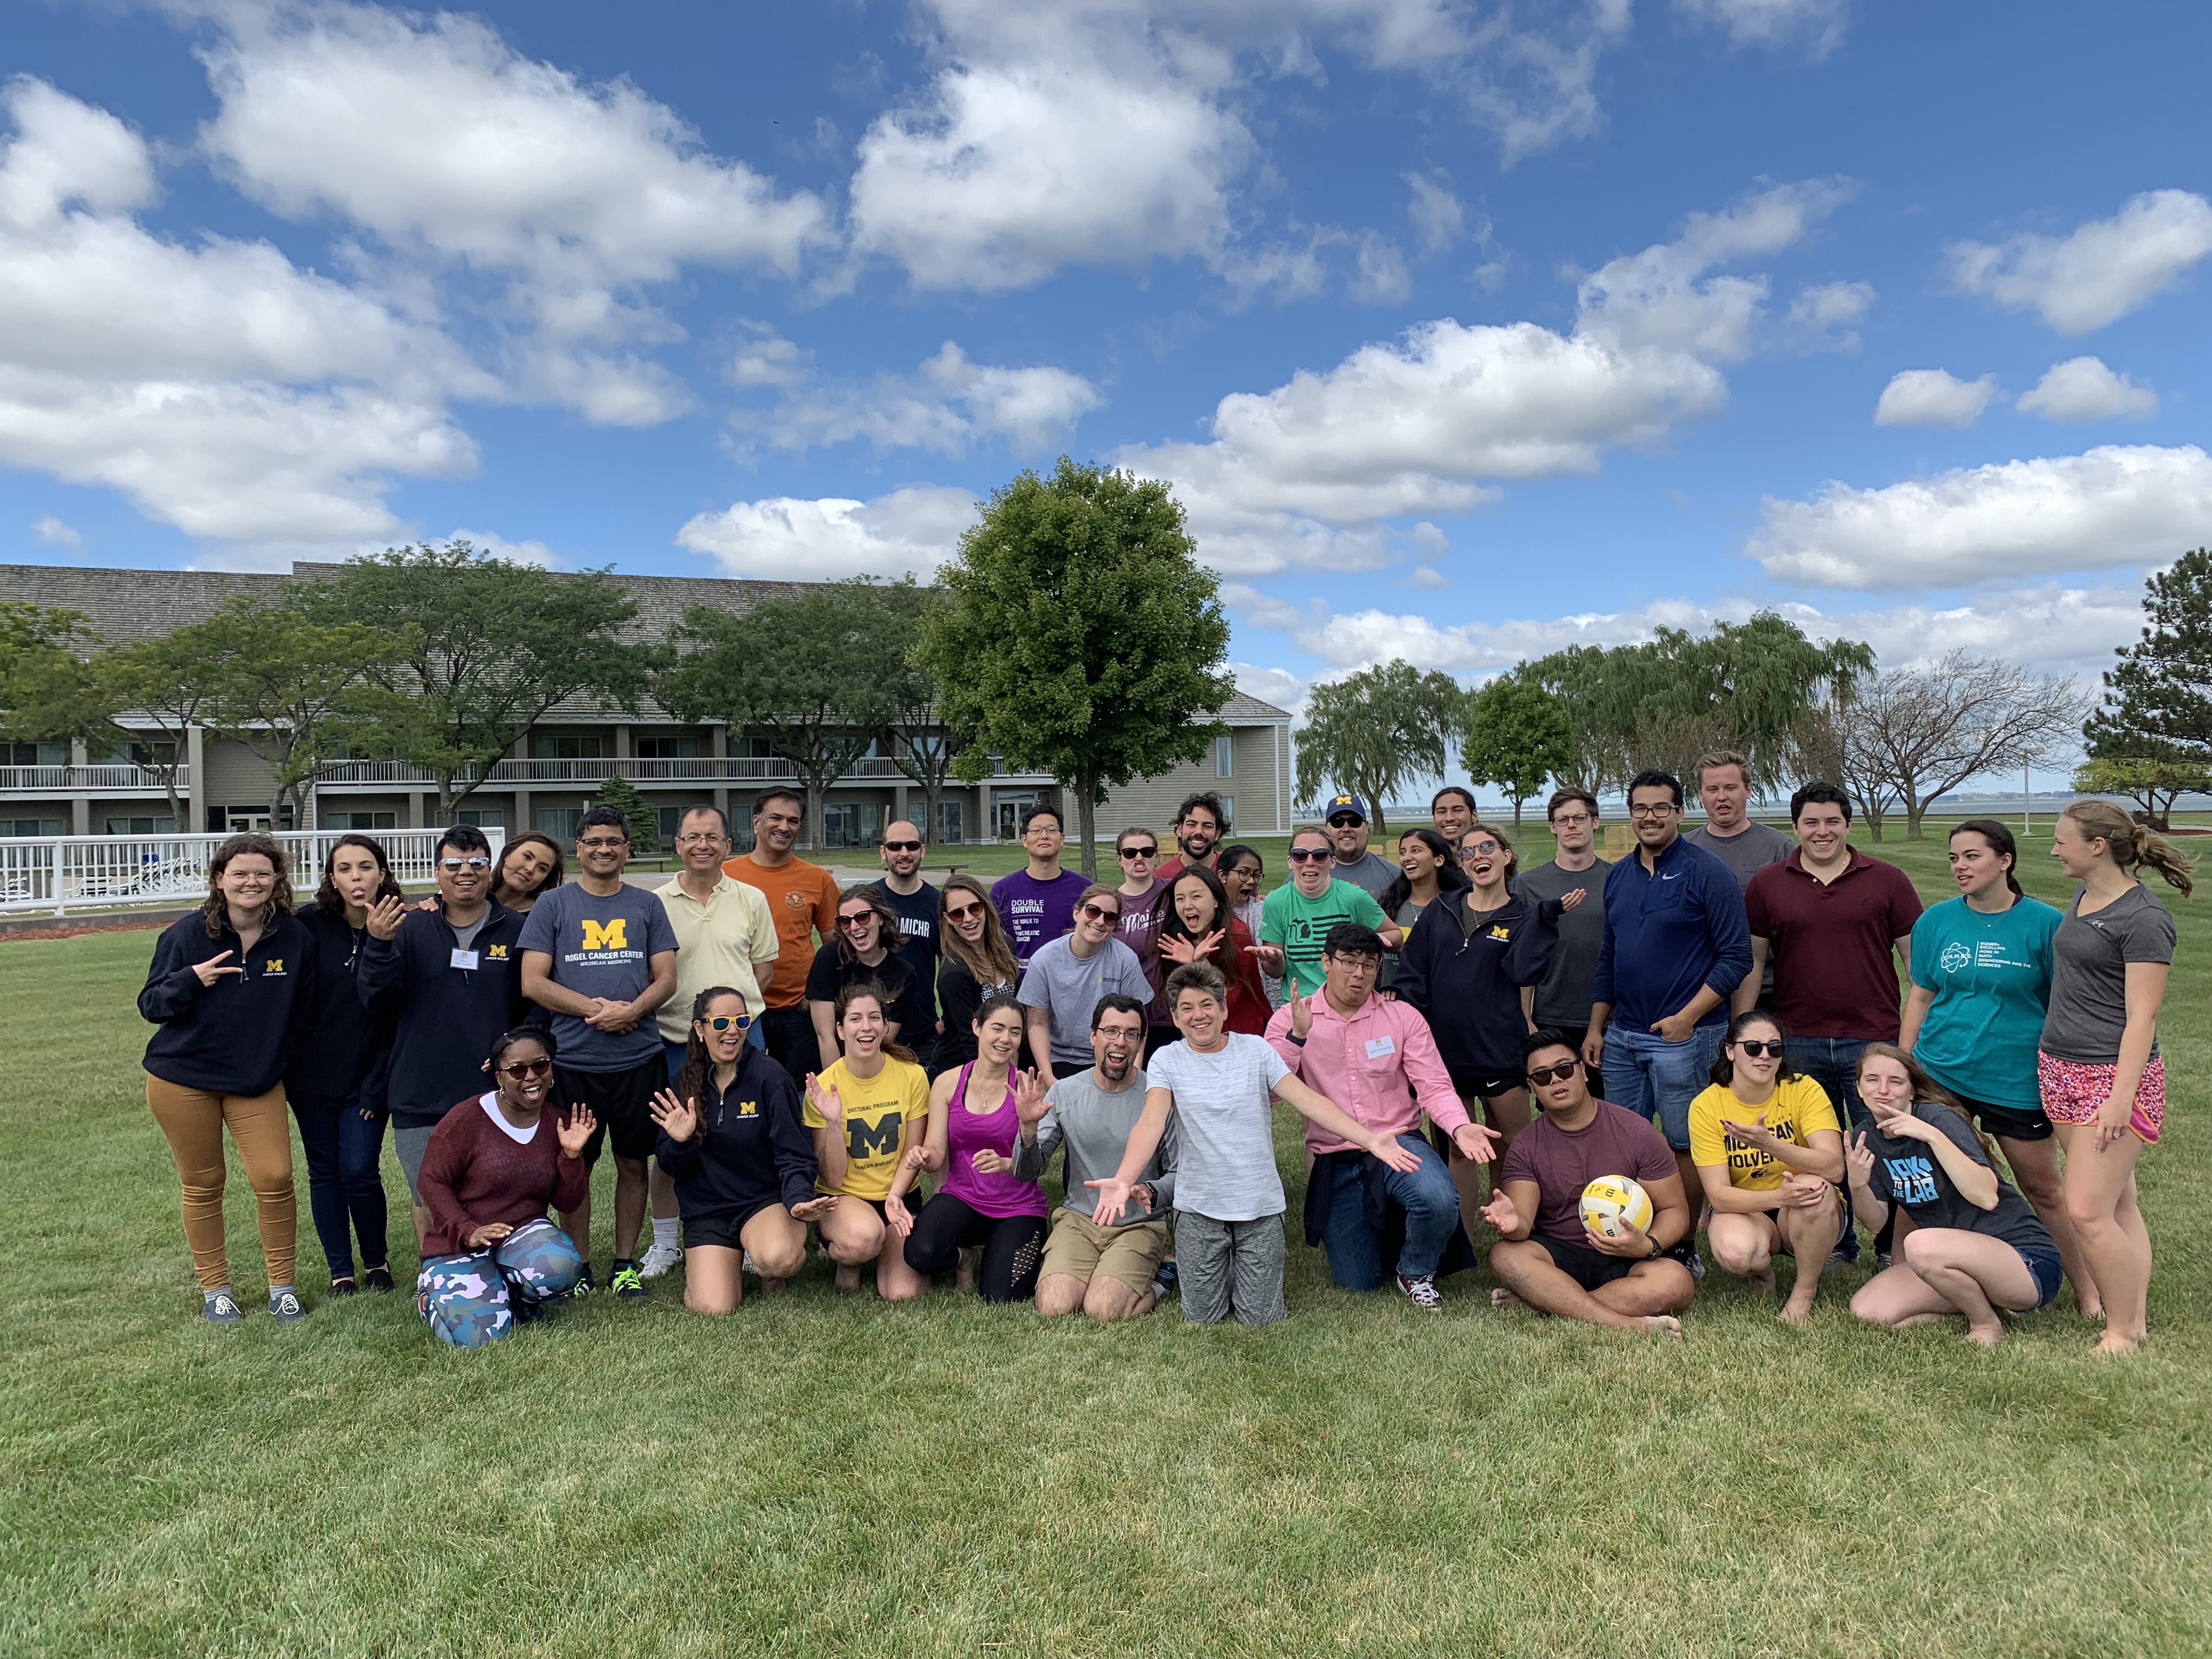 Cancer Bio 2019 retreat group picture